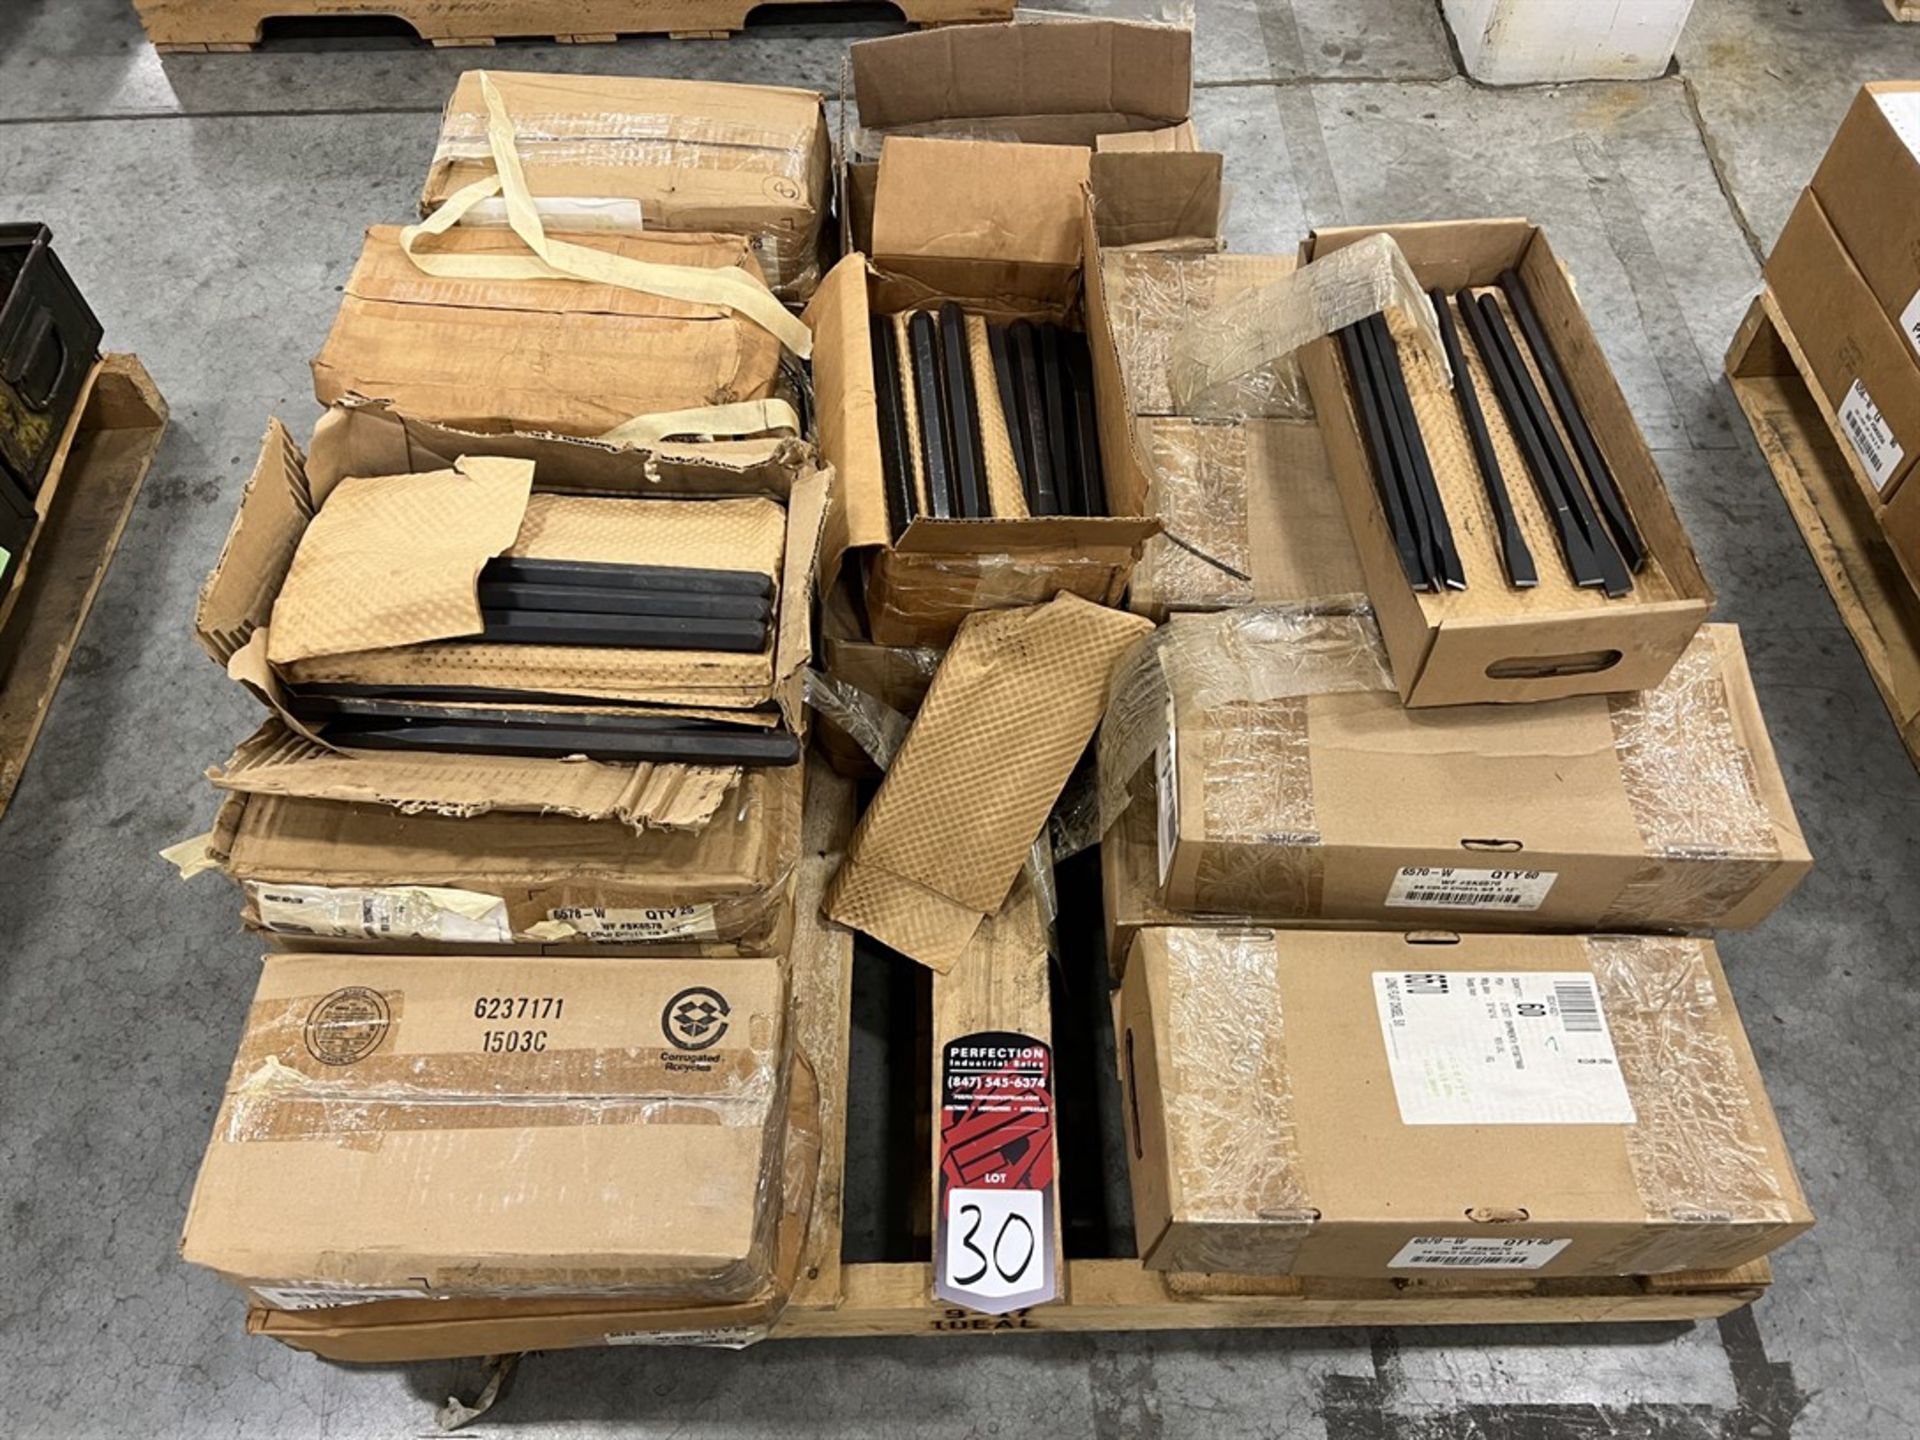 Pallet of Assorted Punches and Chisels